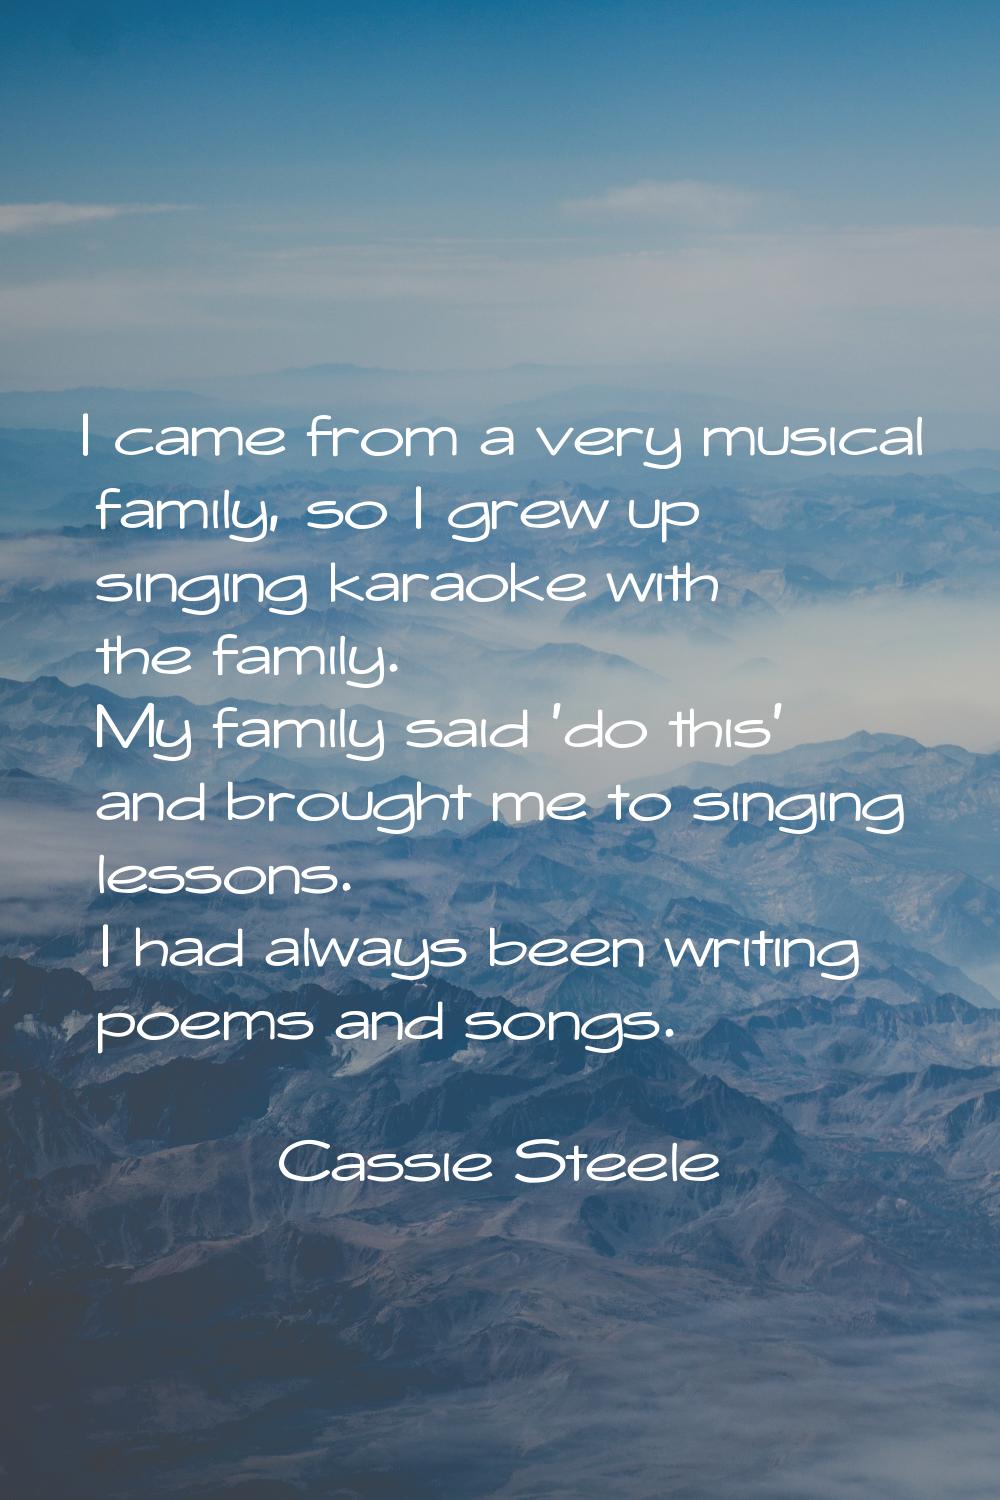 I came from a very musical family, so I grew up singing karaoke with the family. My family said 'do